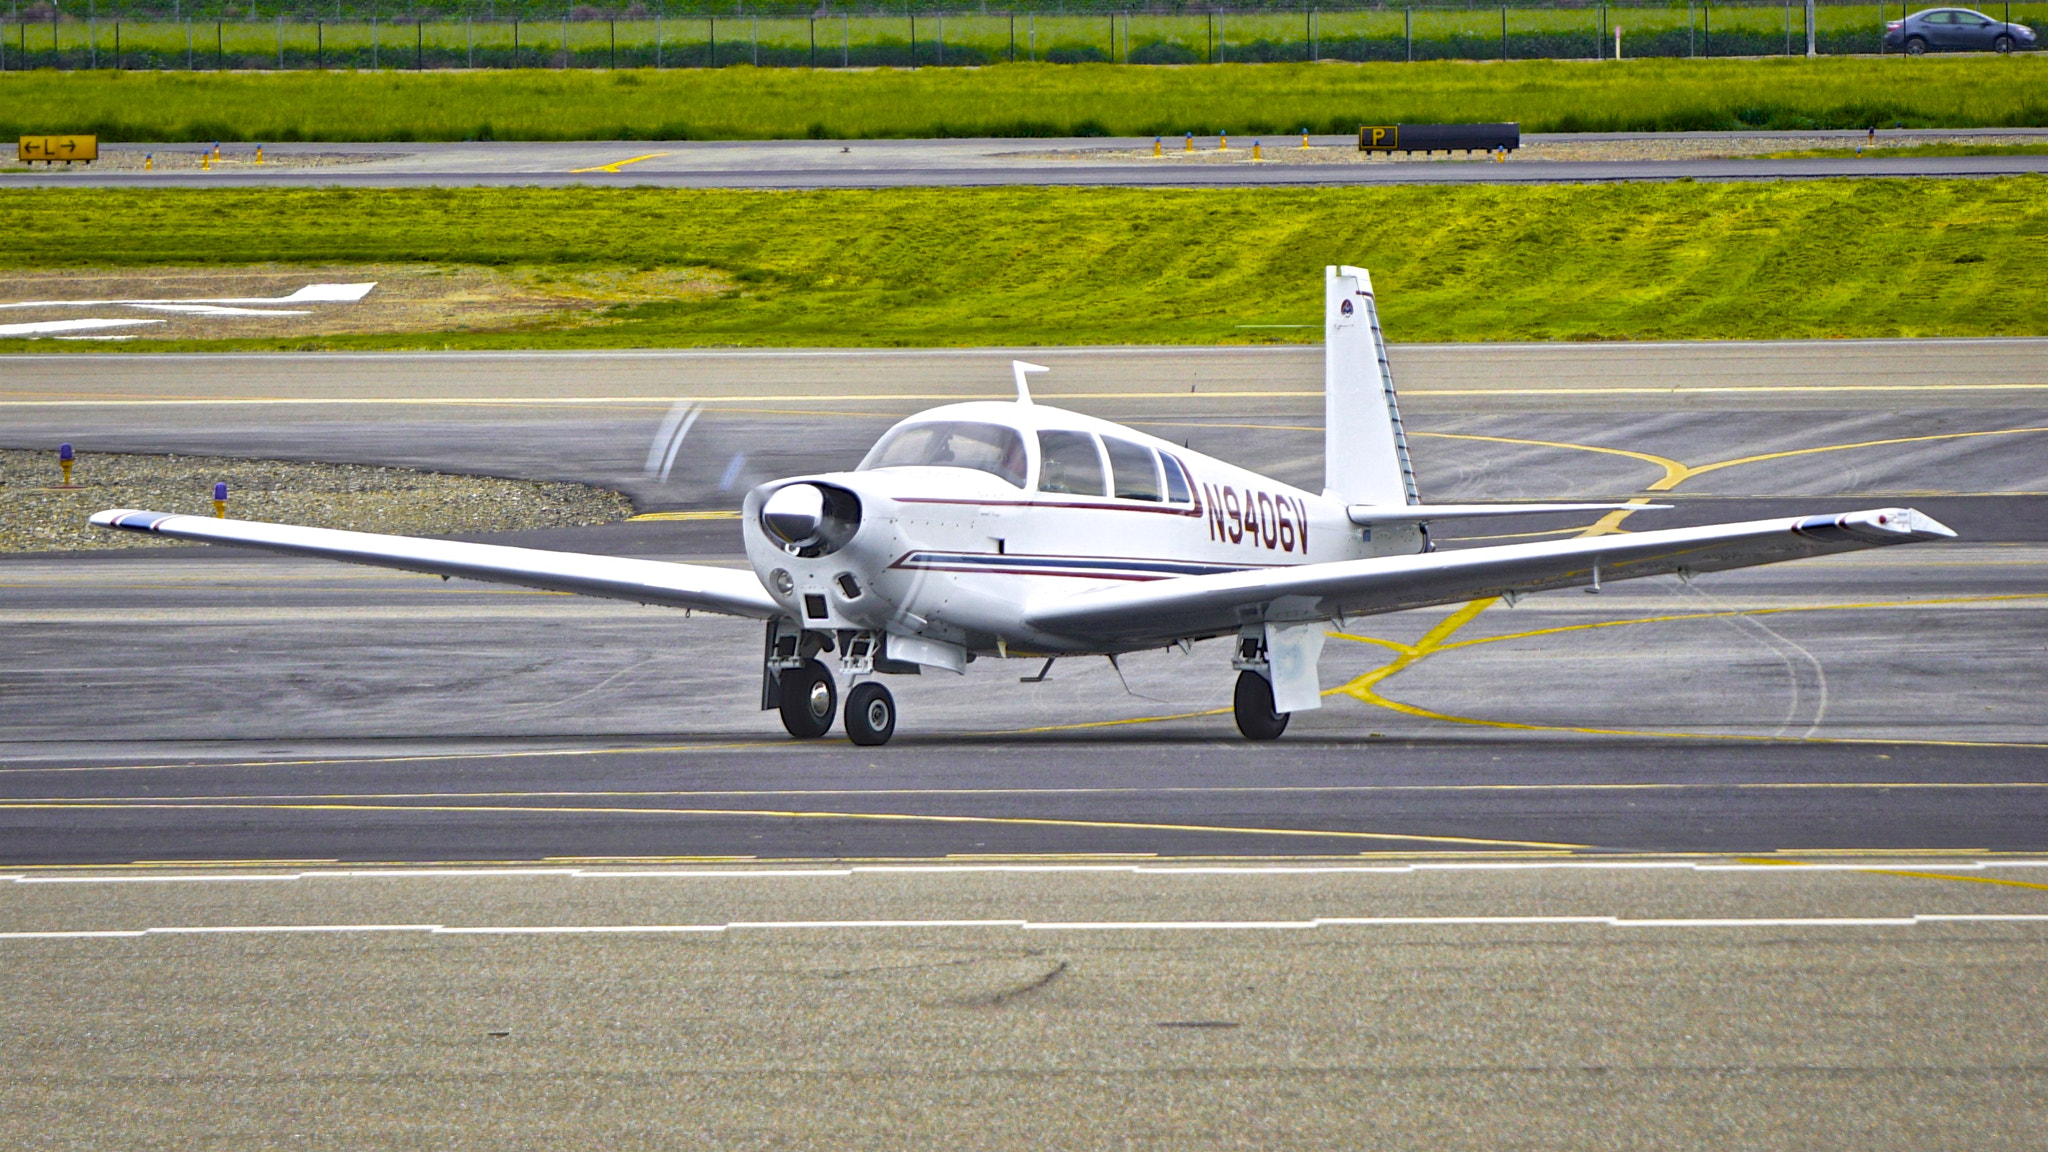 Sony a6000 + Sony FE 24-240mm F3.5-6.3 OSS sample photo. 1969 mooney m20c n9406v c/n 700034 at livermore airport in california. 2017. photography